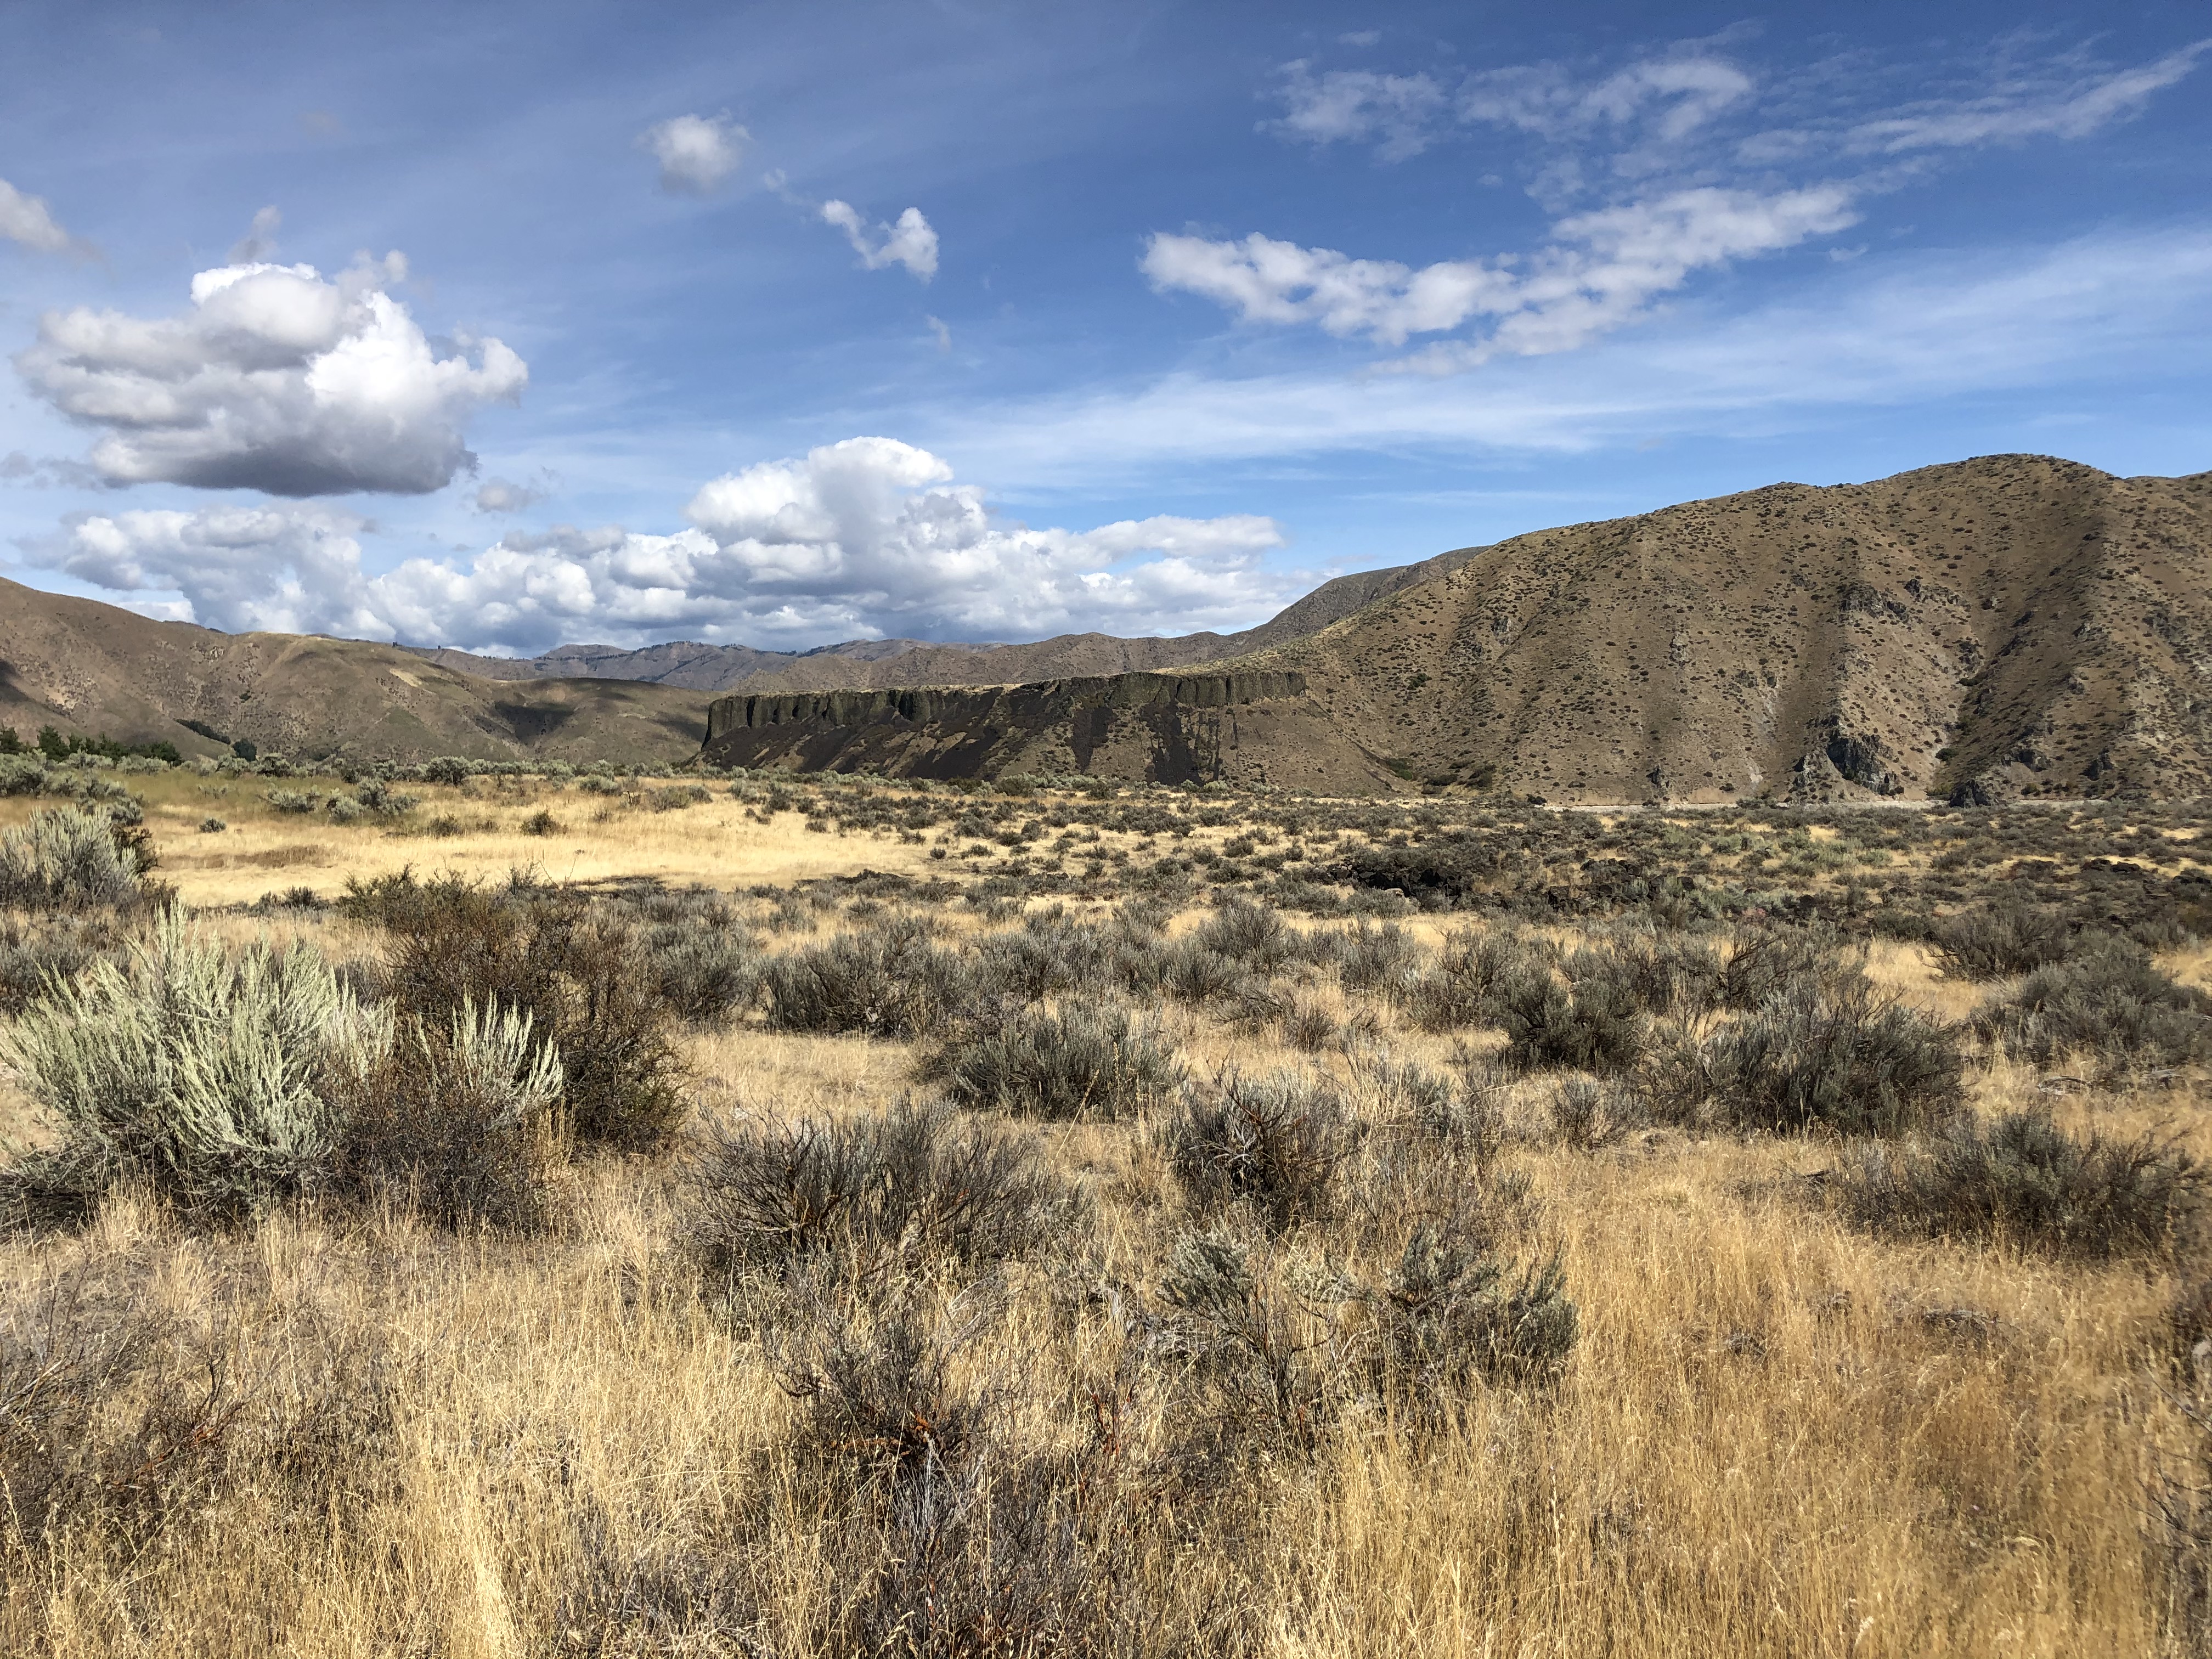 Idaho landscape featuring sagebrush and grasses, with foothills in the background